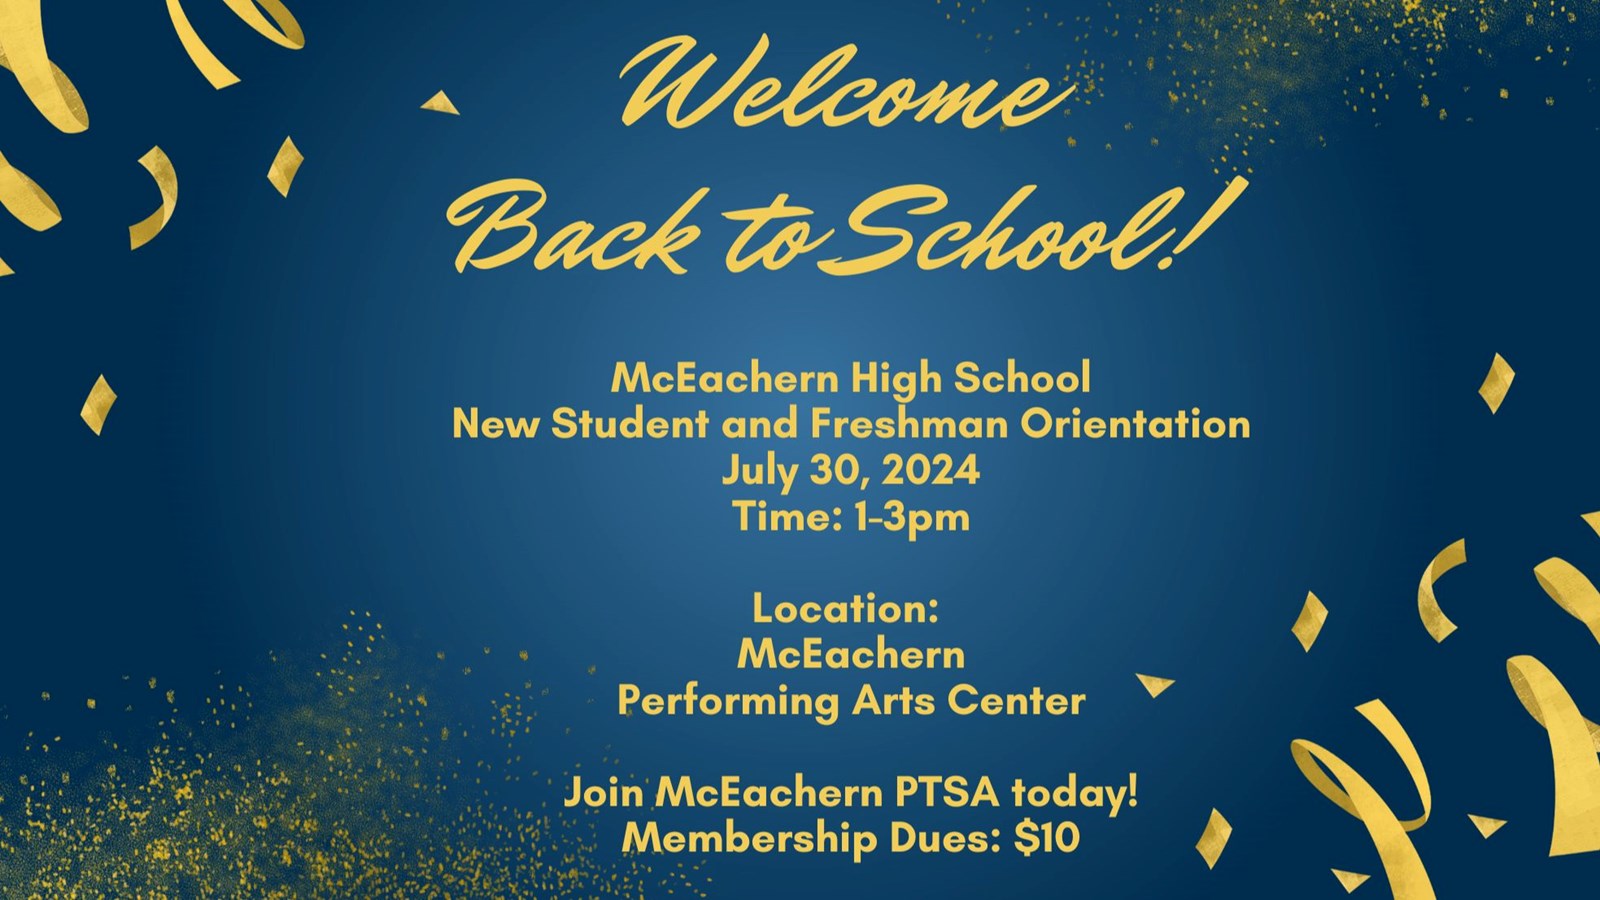 New Student and Freshman Orientation